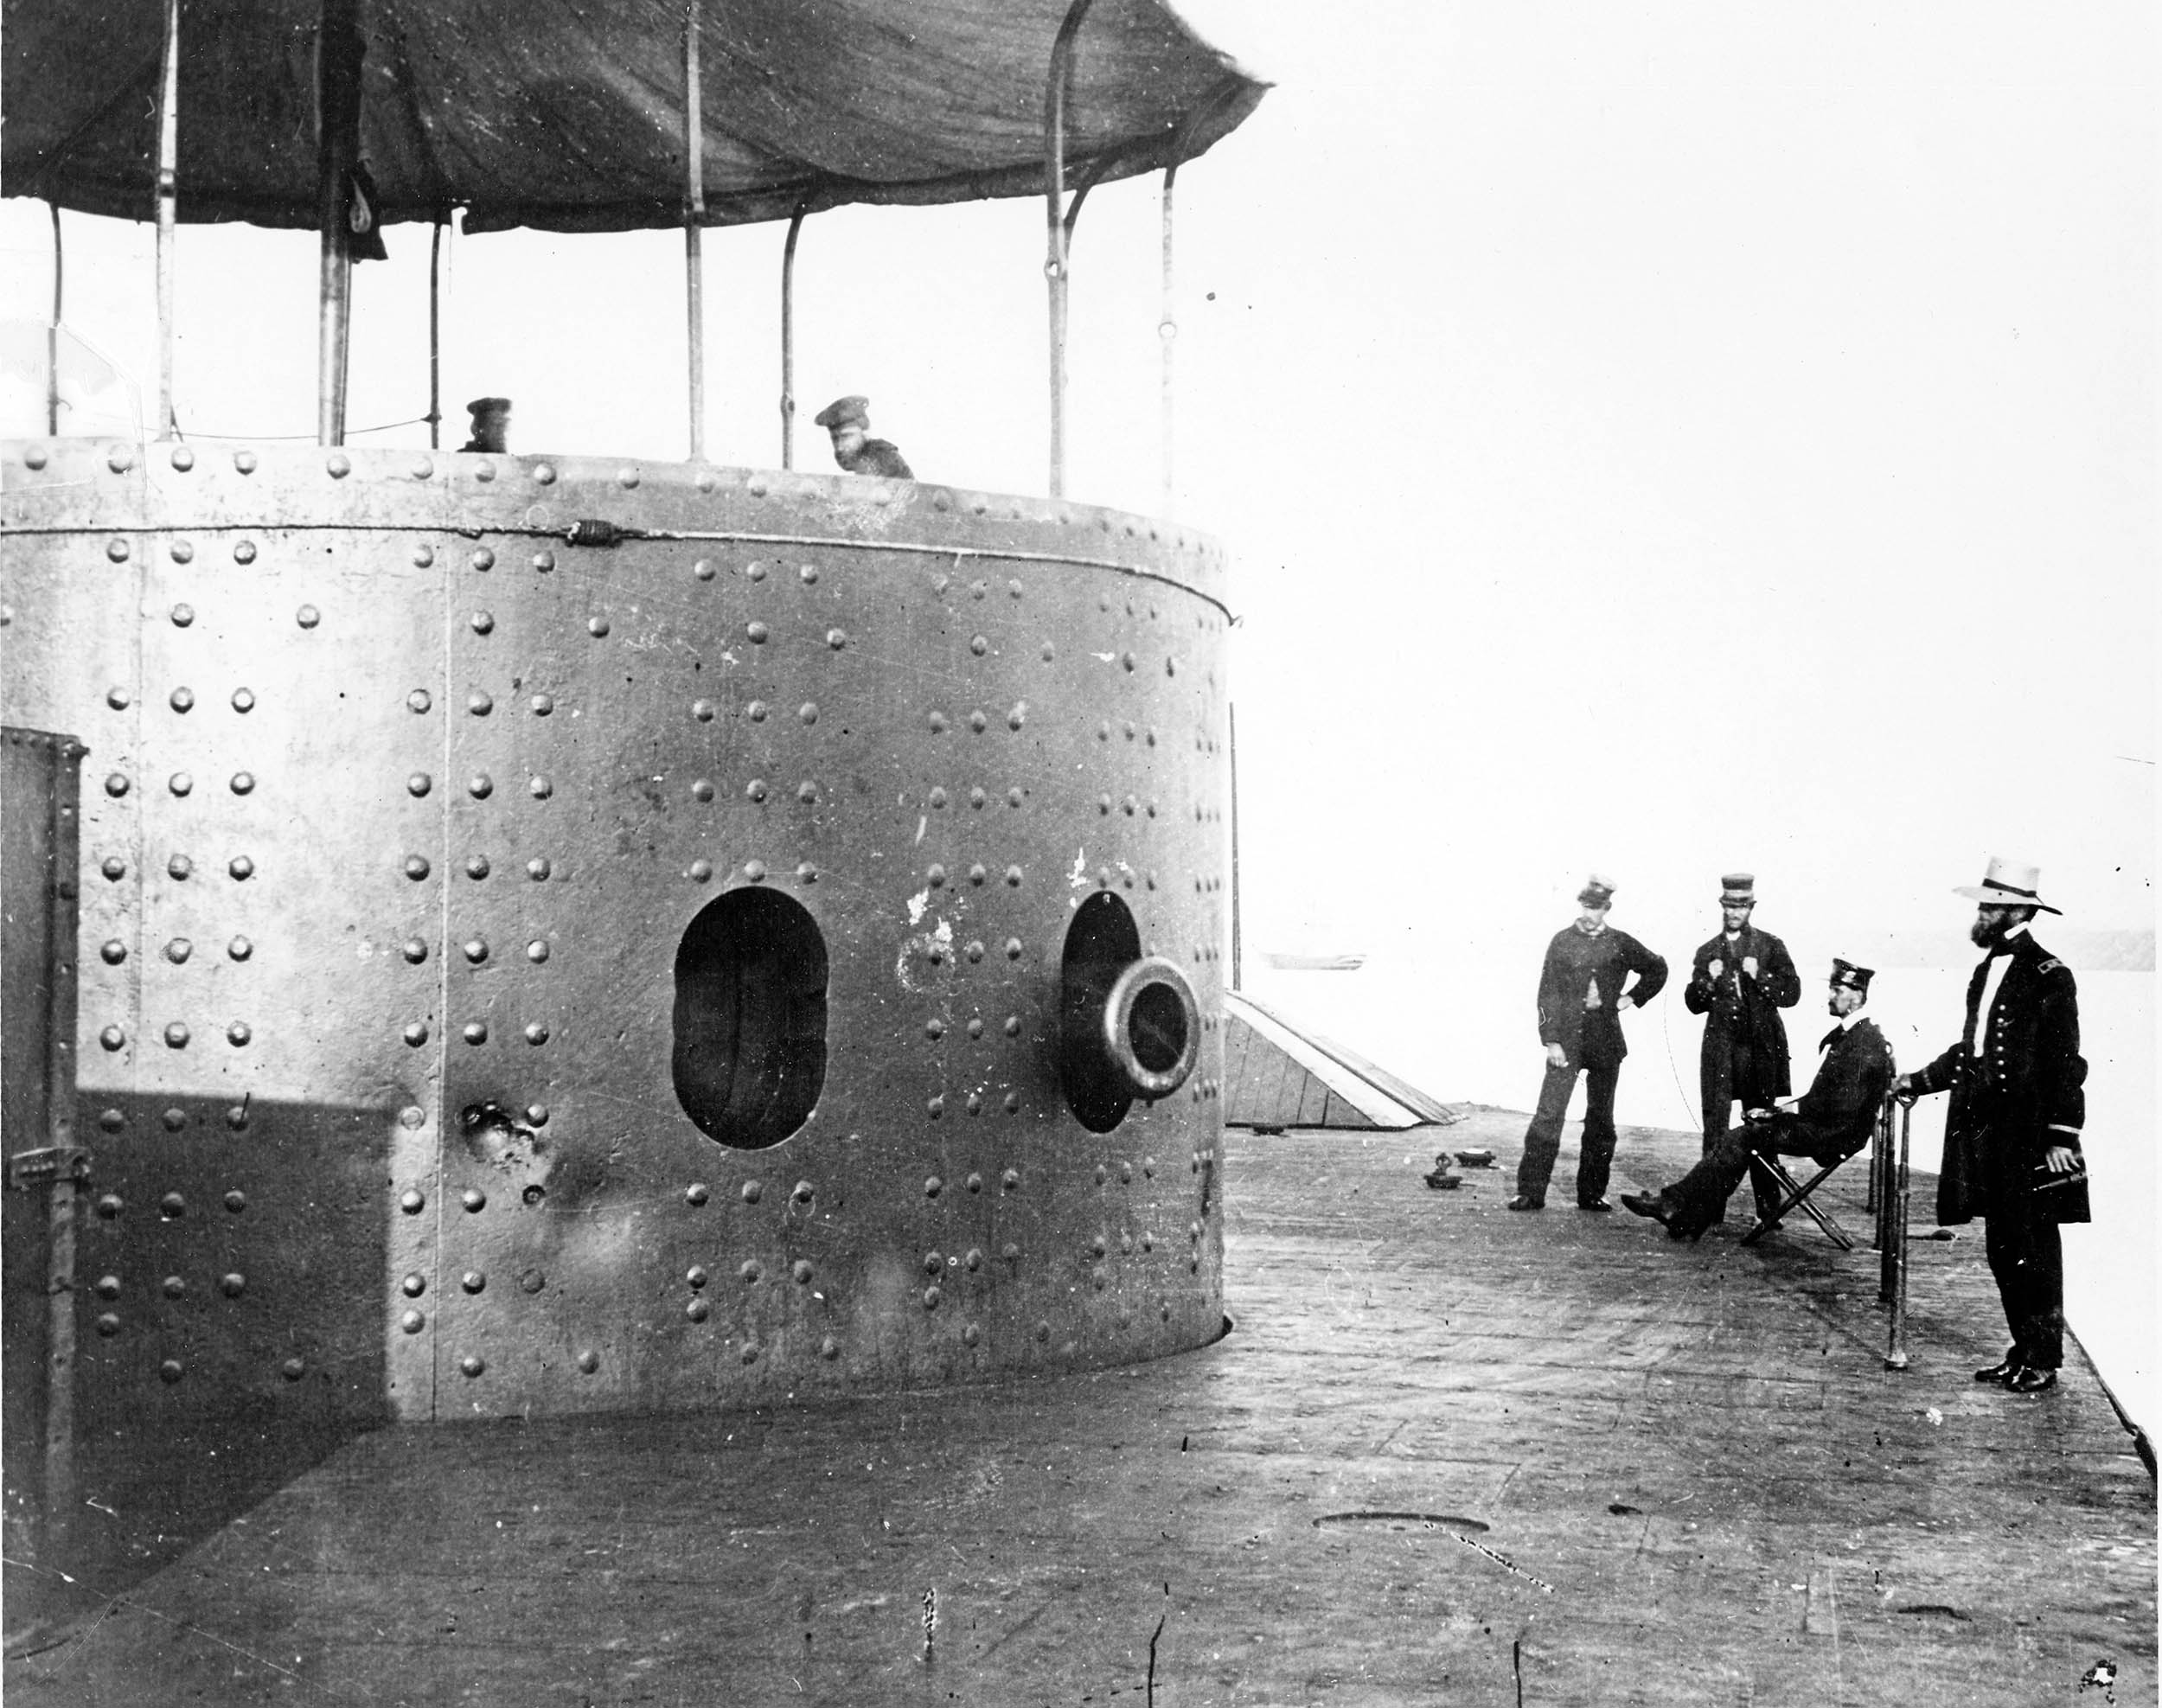 Deck of USS Monitor, on James River in Virginia, July 9, 1862; officers at right (left to right): Third Assistant Engineer Robinson W. Hands, Acting Master Louis N. Stodder, Second Assistant Engineer Albert B. Campbell (seated), and Acting Volunteer Lieutenant William Flye (with binoculars) (U.S. Navy/Naval History and Heritage Command)